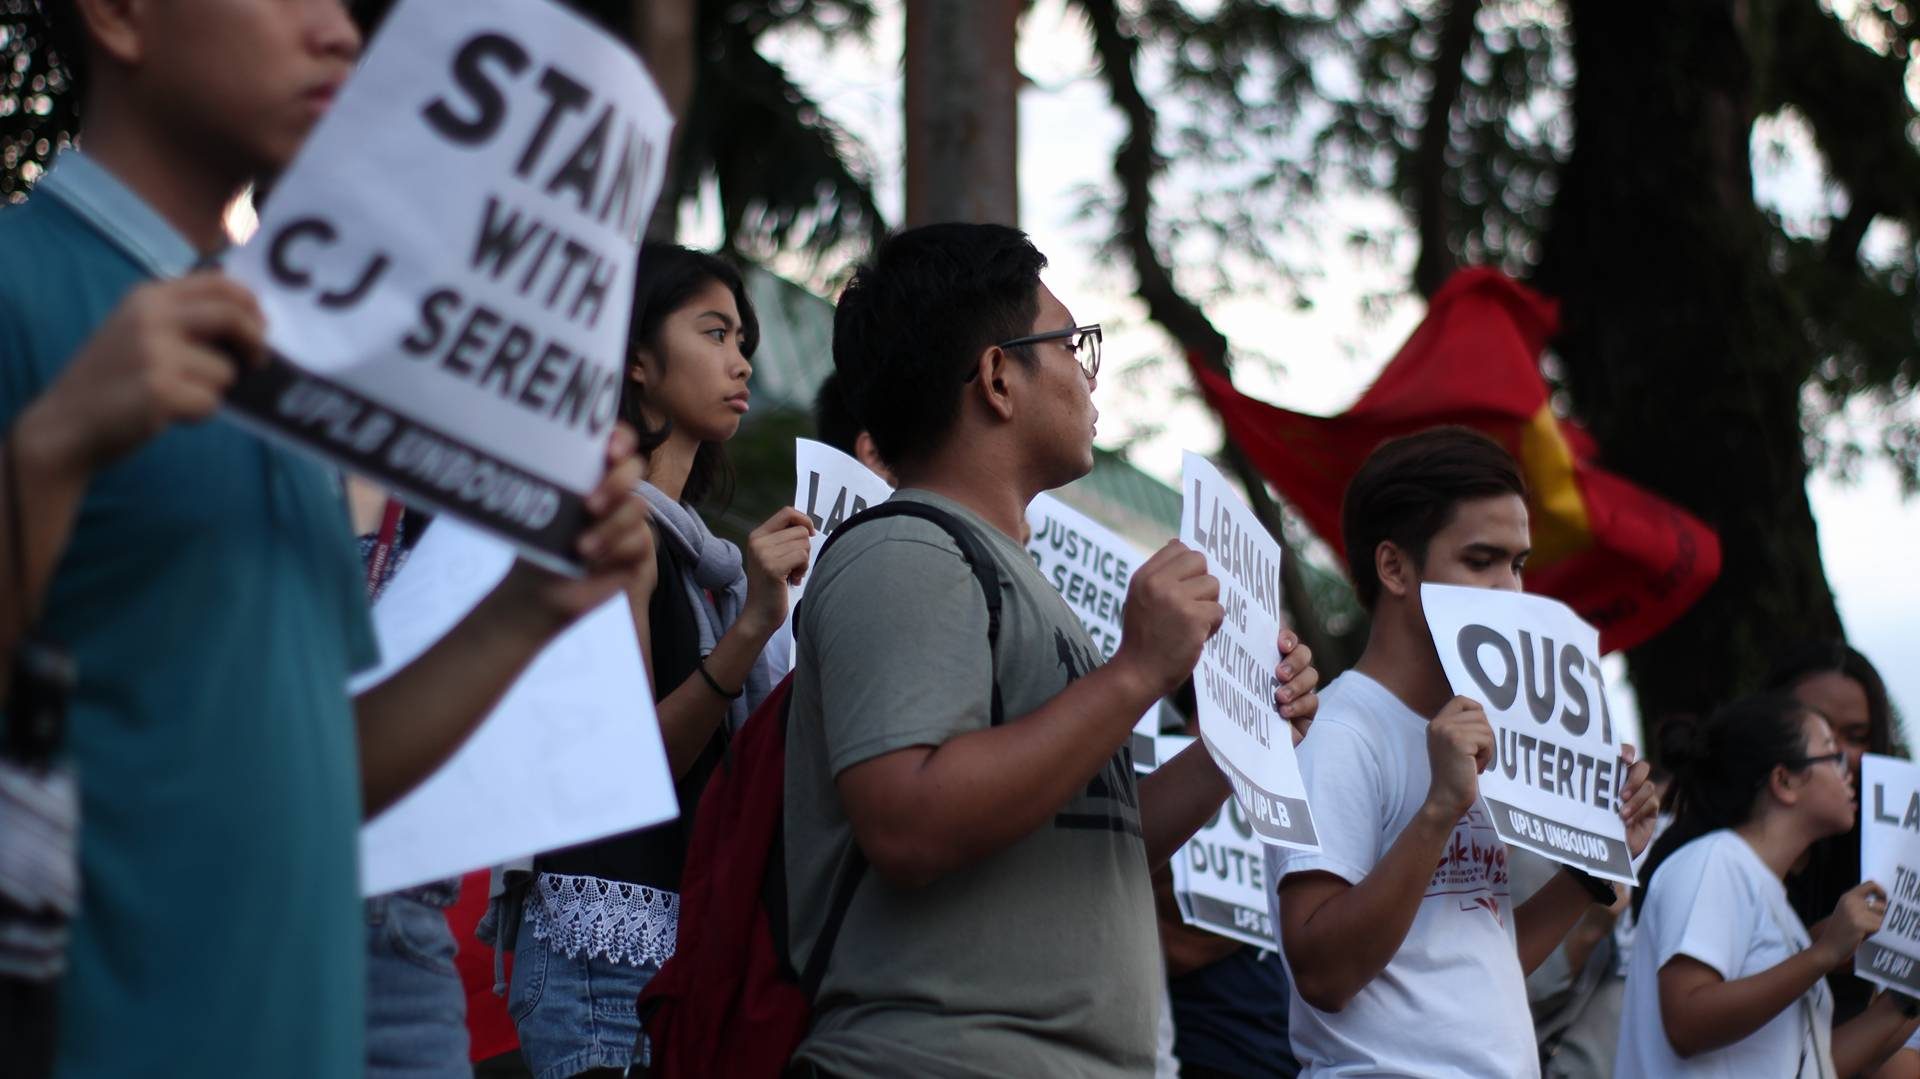 OUST DUTERTE. In an indignation rally against the disbarment of Chief Justice Maria Lourdes Sereno, students also call for the ouster of President Rodrigo Duterte. Photo by Neren Bartolay 